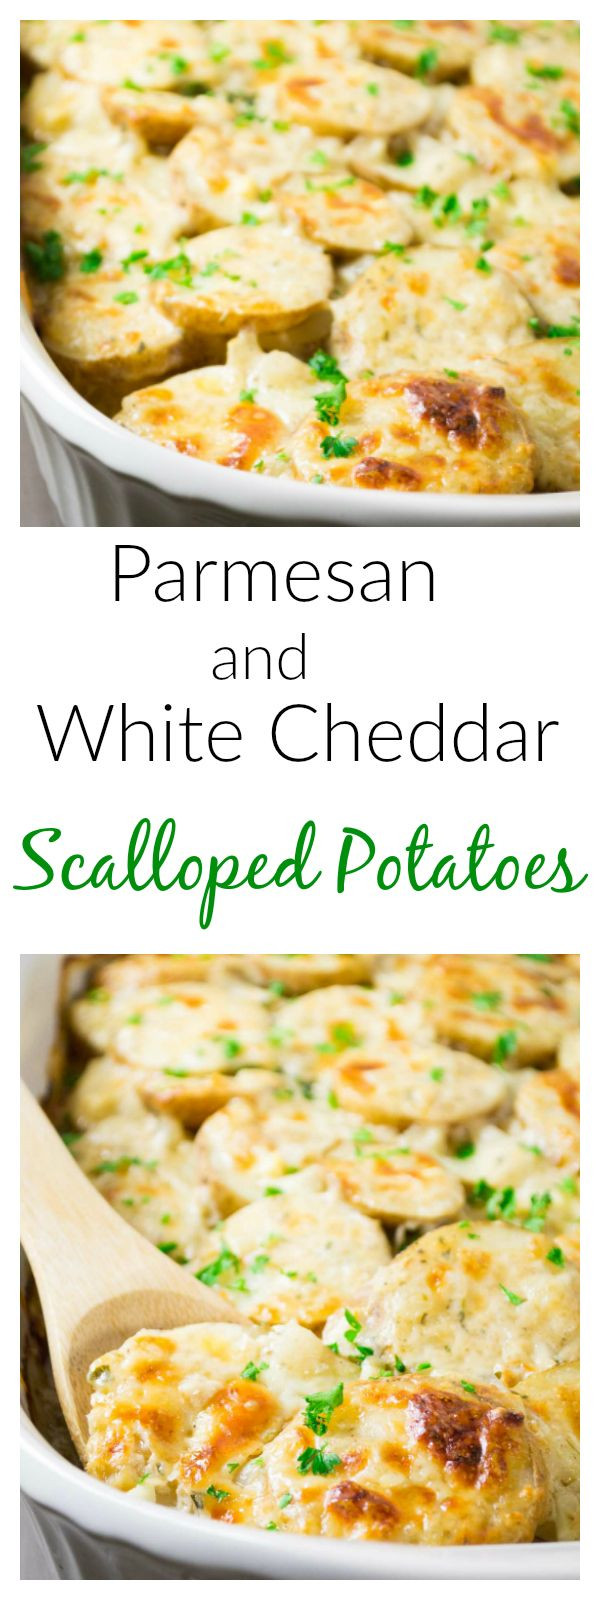 Gourmet Scalloped Potatoes
 parmesan and white cheddar scalloped potatoes